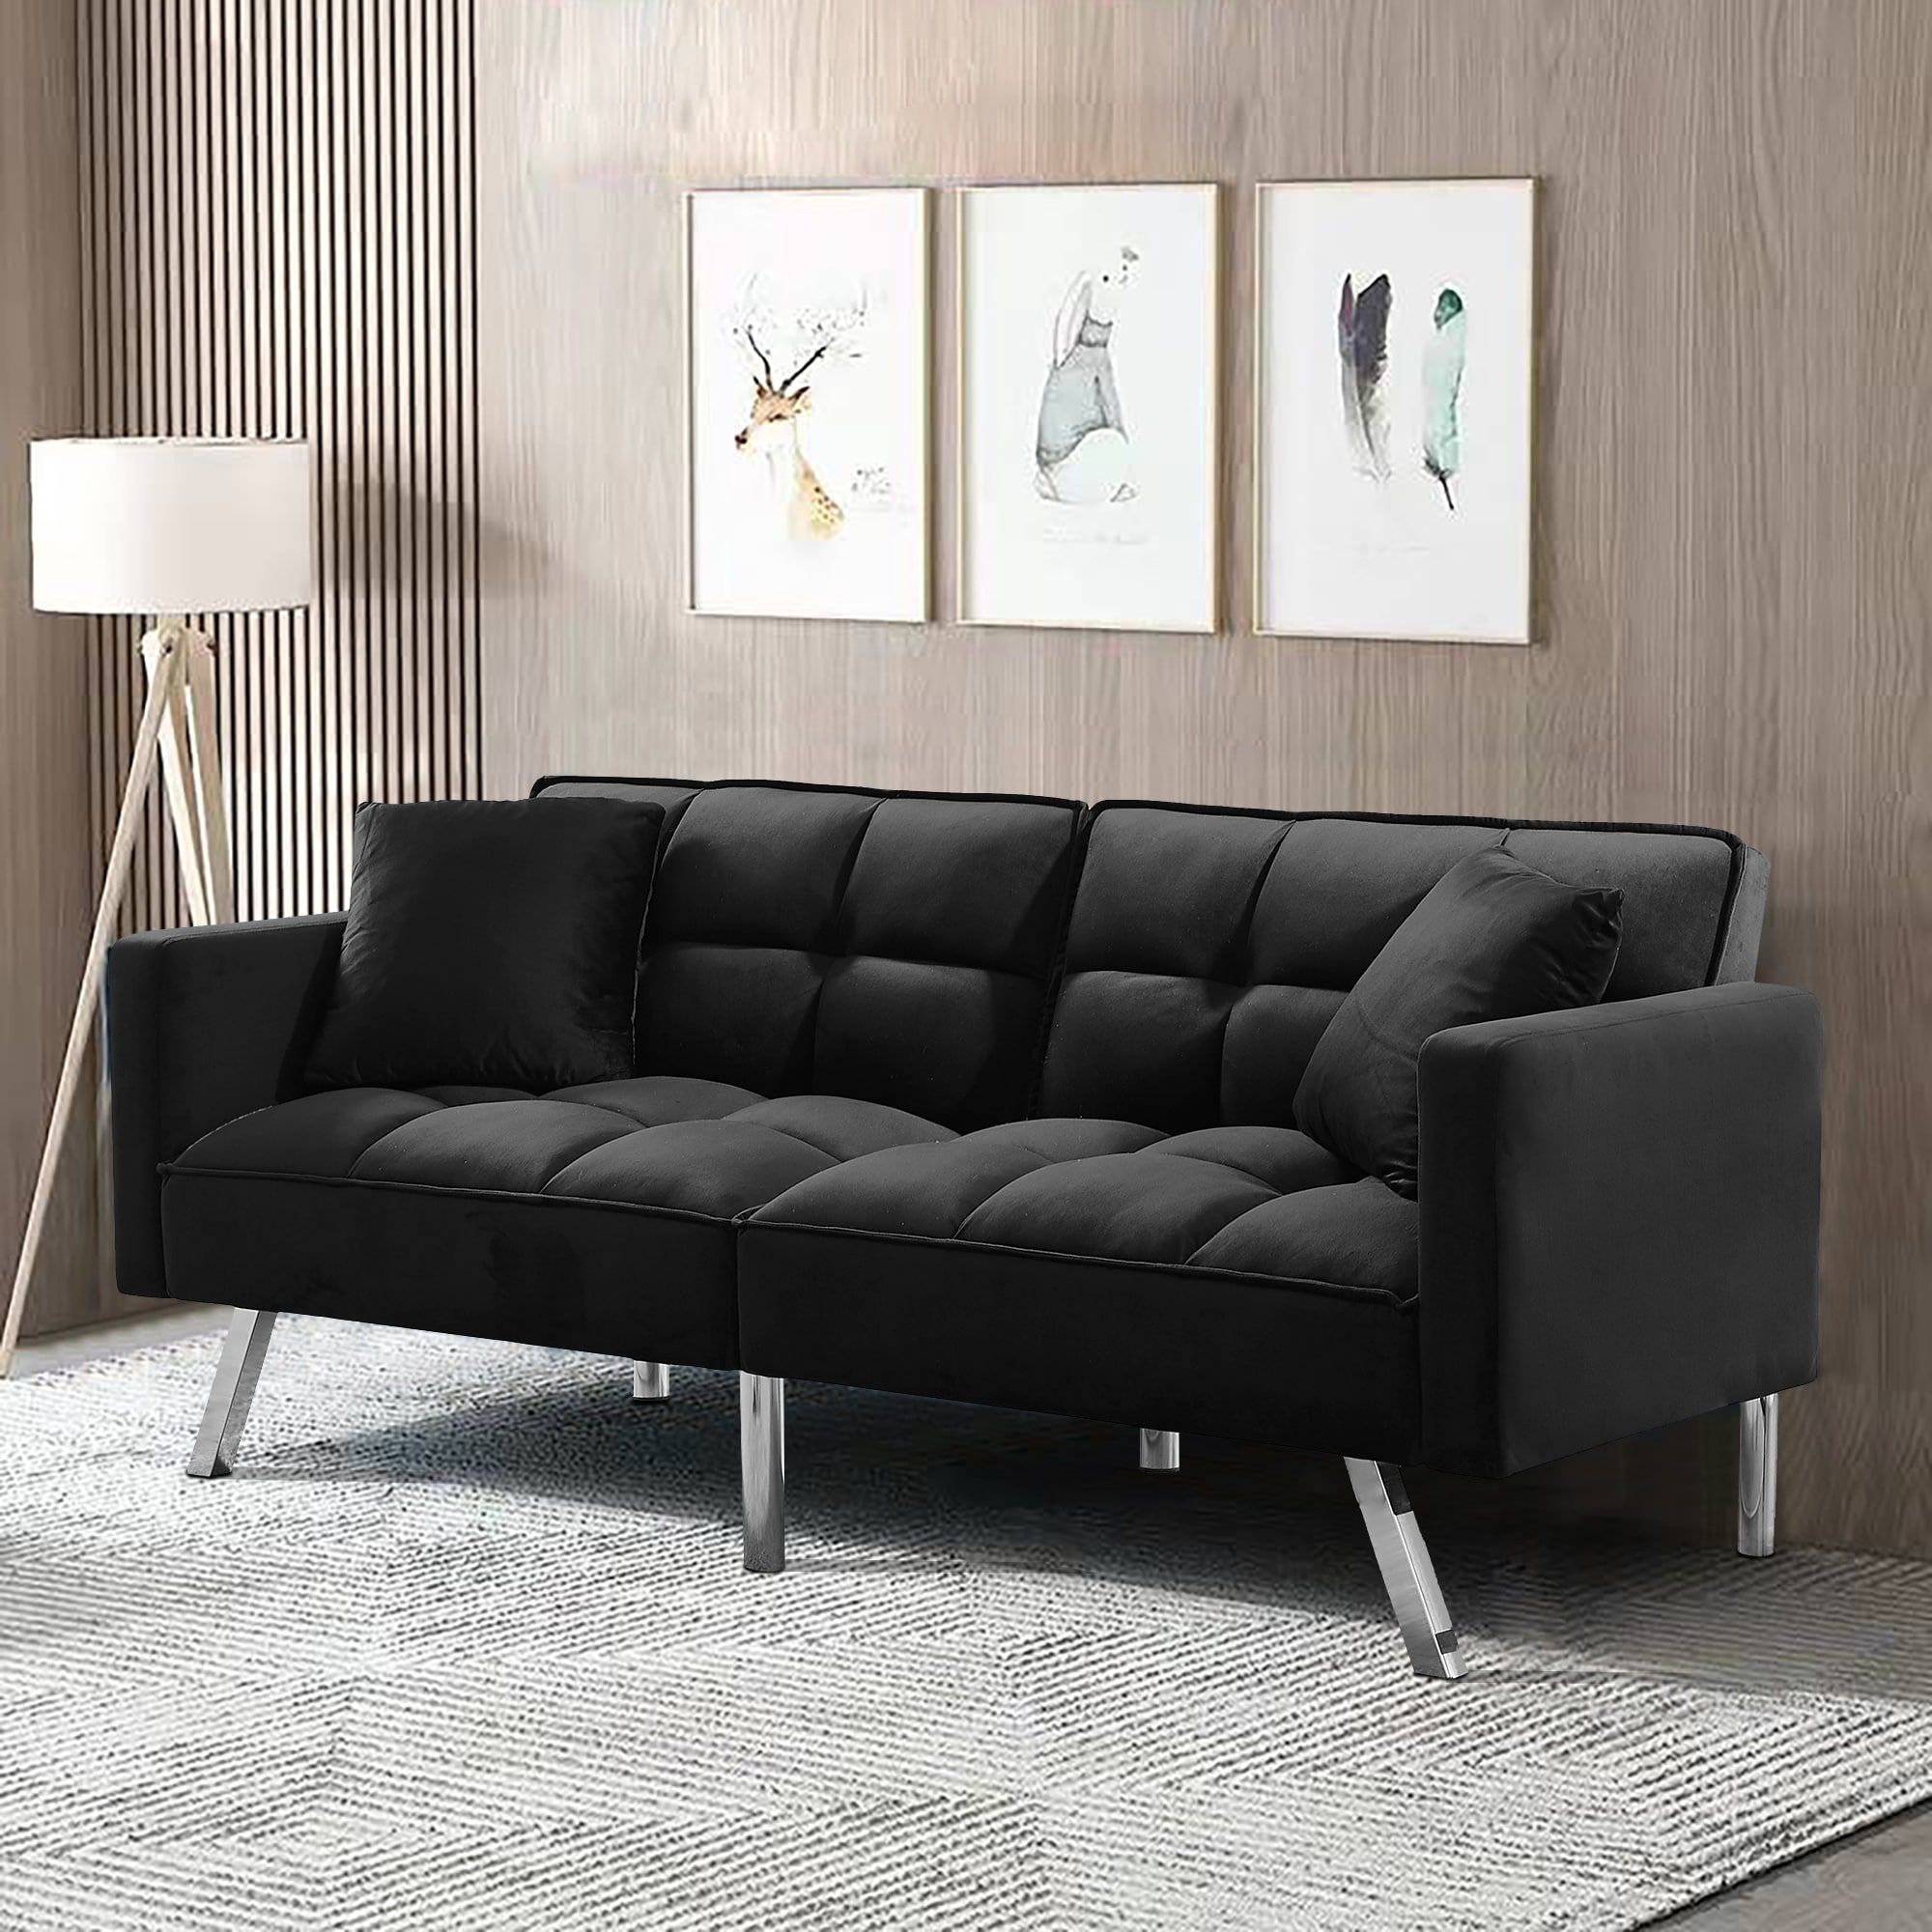 Mid Century Modern Design Velvet 2 Seater Black Sofa Bed With 2 Tufted Back  For Family Living Rooms – Bed Bath & Beyond – 39581821 With Regard To Black Velvet 2 Seater Sofa Beds (View 3 of 15)